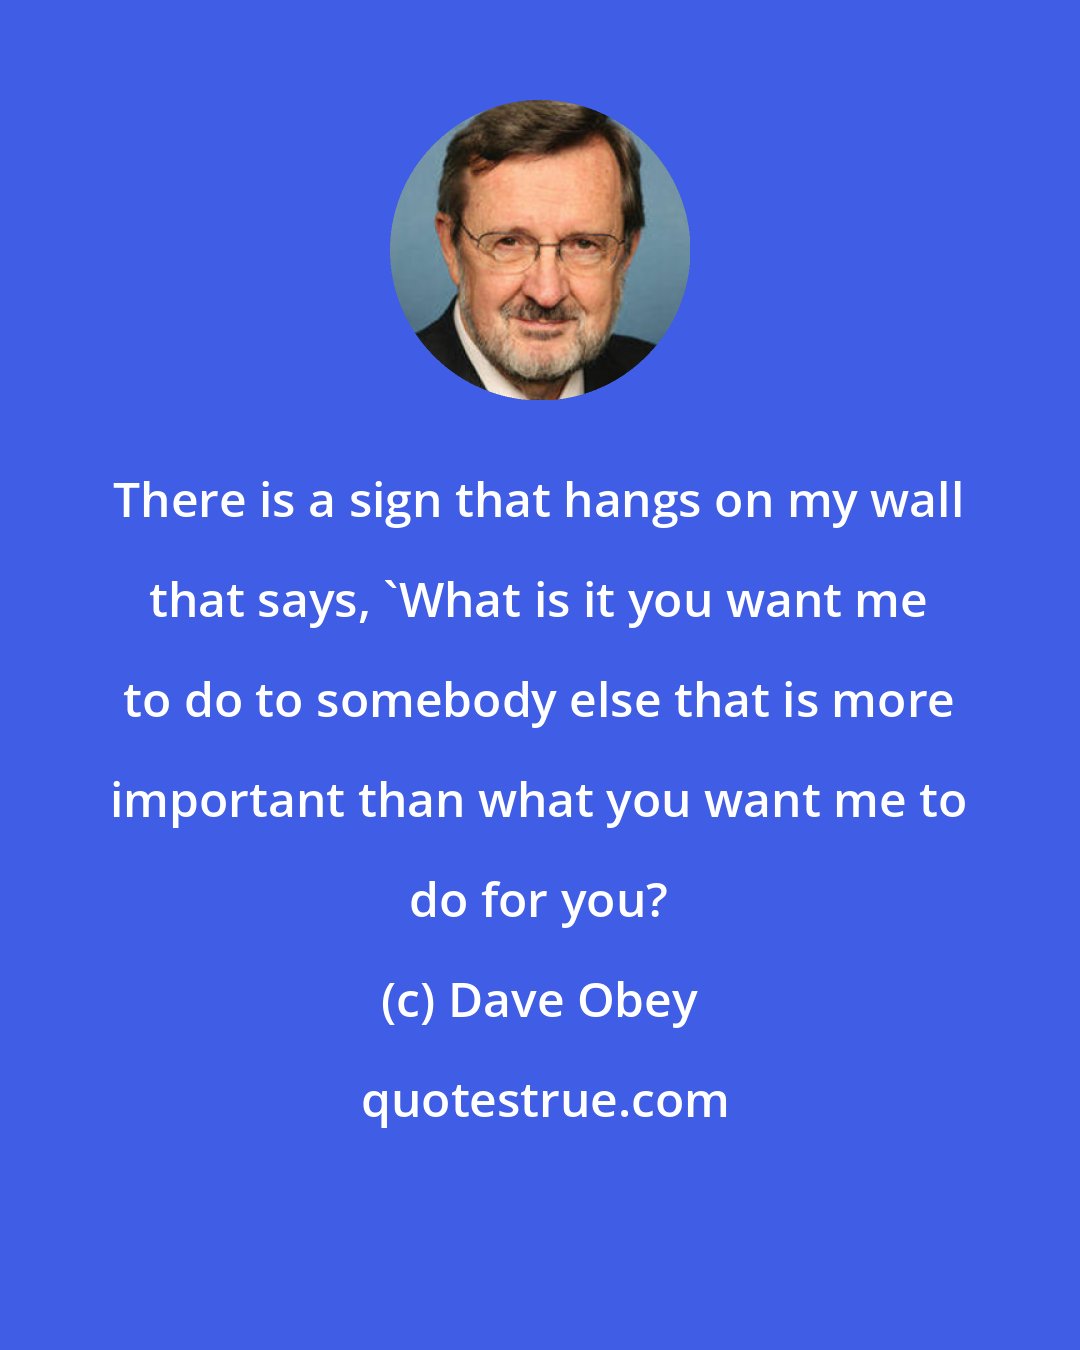 Dave Obey: There is a sign that hangs on my wall that says, 'What is it you want me to do to somebody else that is more important than what you want me to do for you?